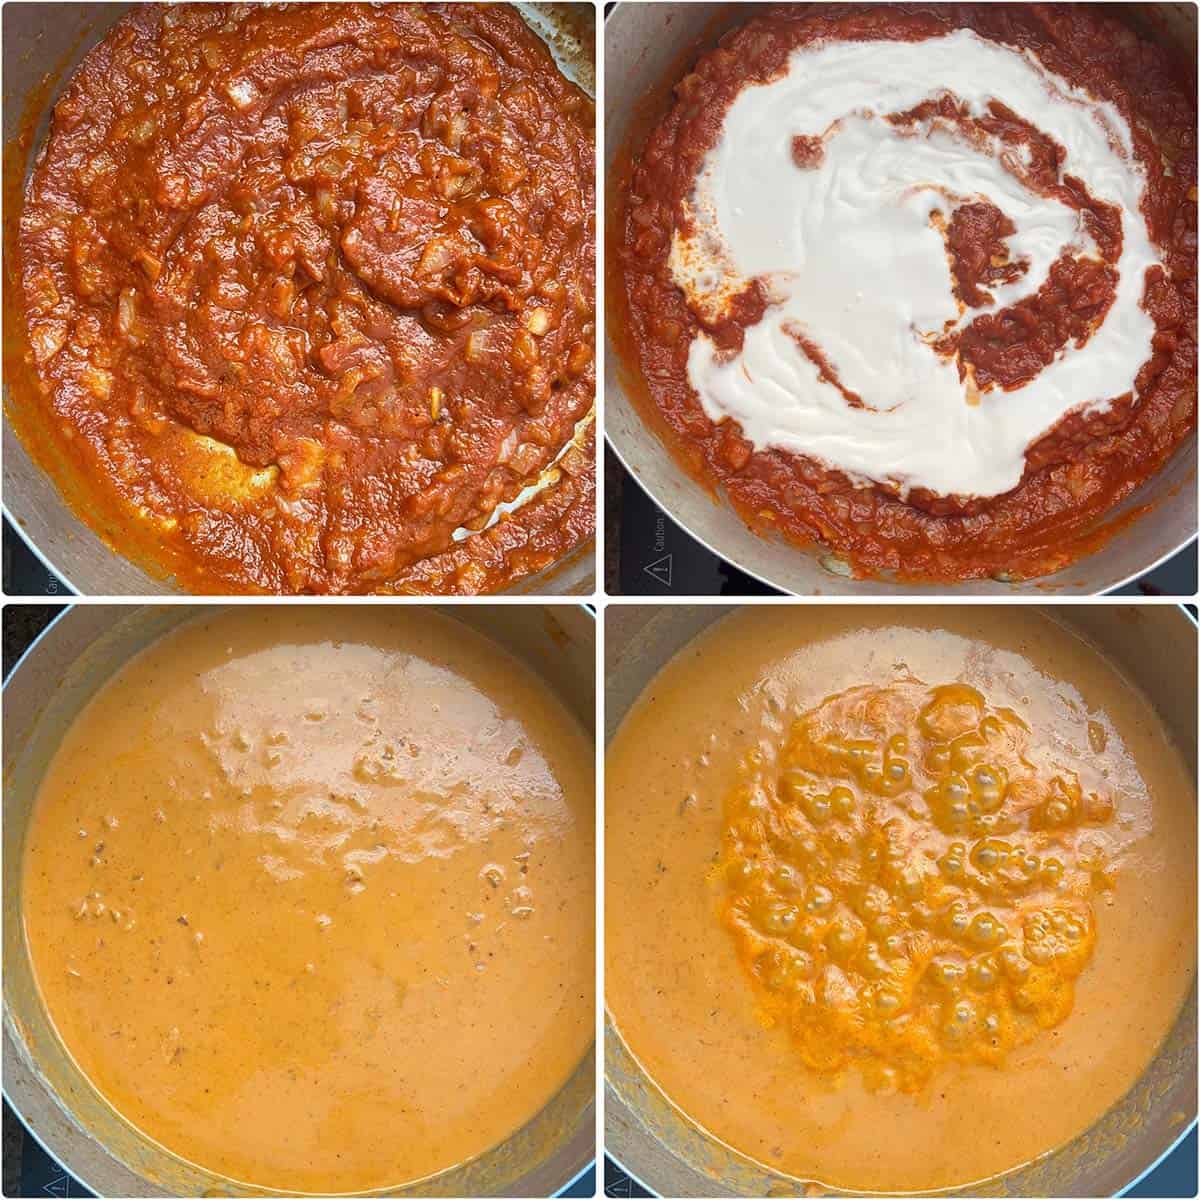 4 panel photo showing the simmering of tomato sauce with coconut milk.